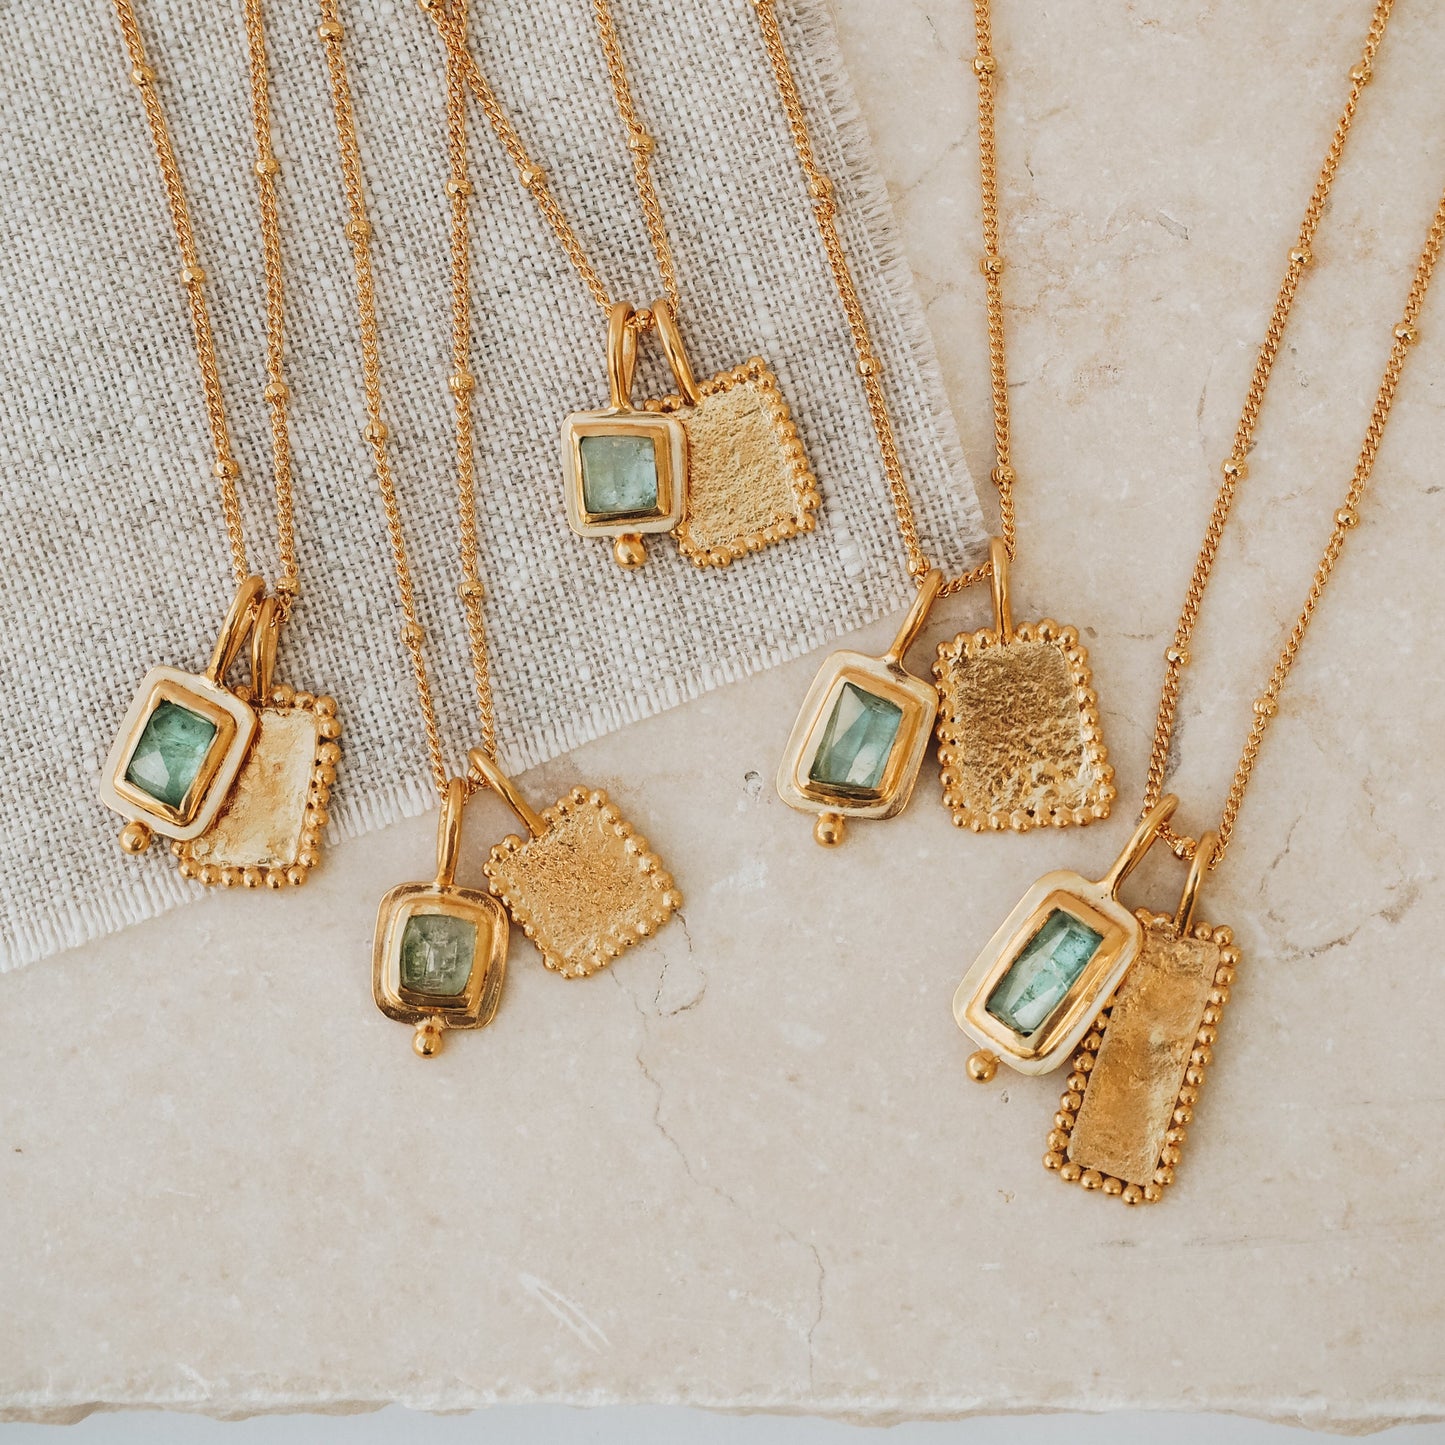 Collection of elegant rich gold necklaces, each featuring a square pendant adorned with a mesmerizing ocean blue rose cut tourmaline gemstone, textured surfaces, and meticulous granulation work